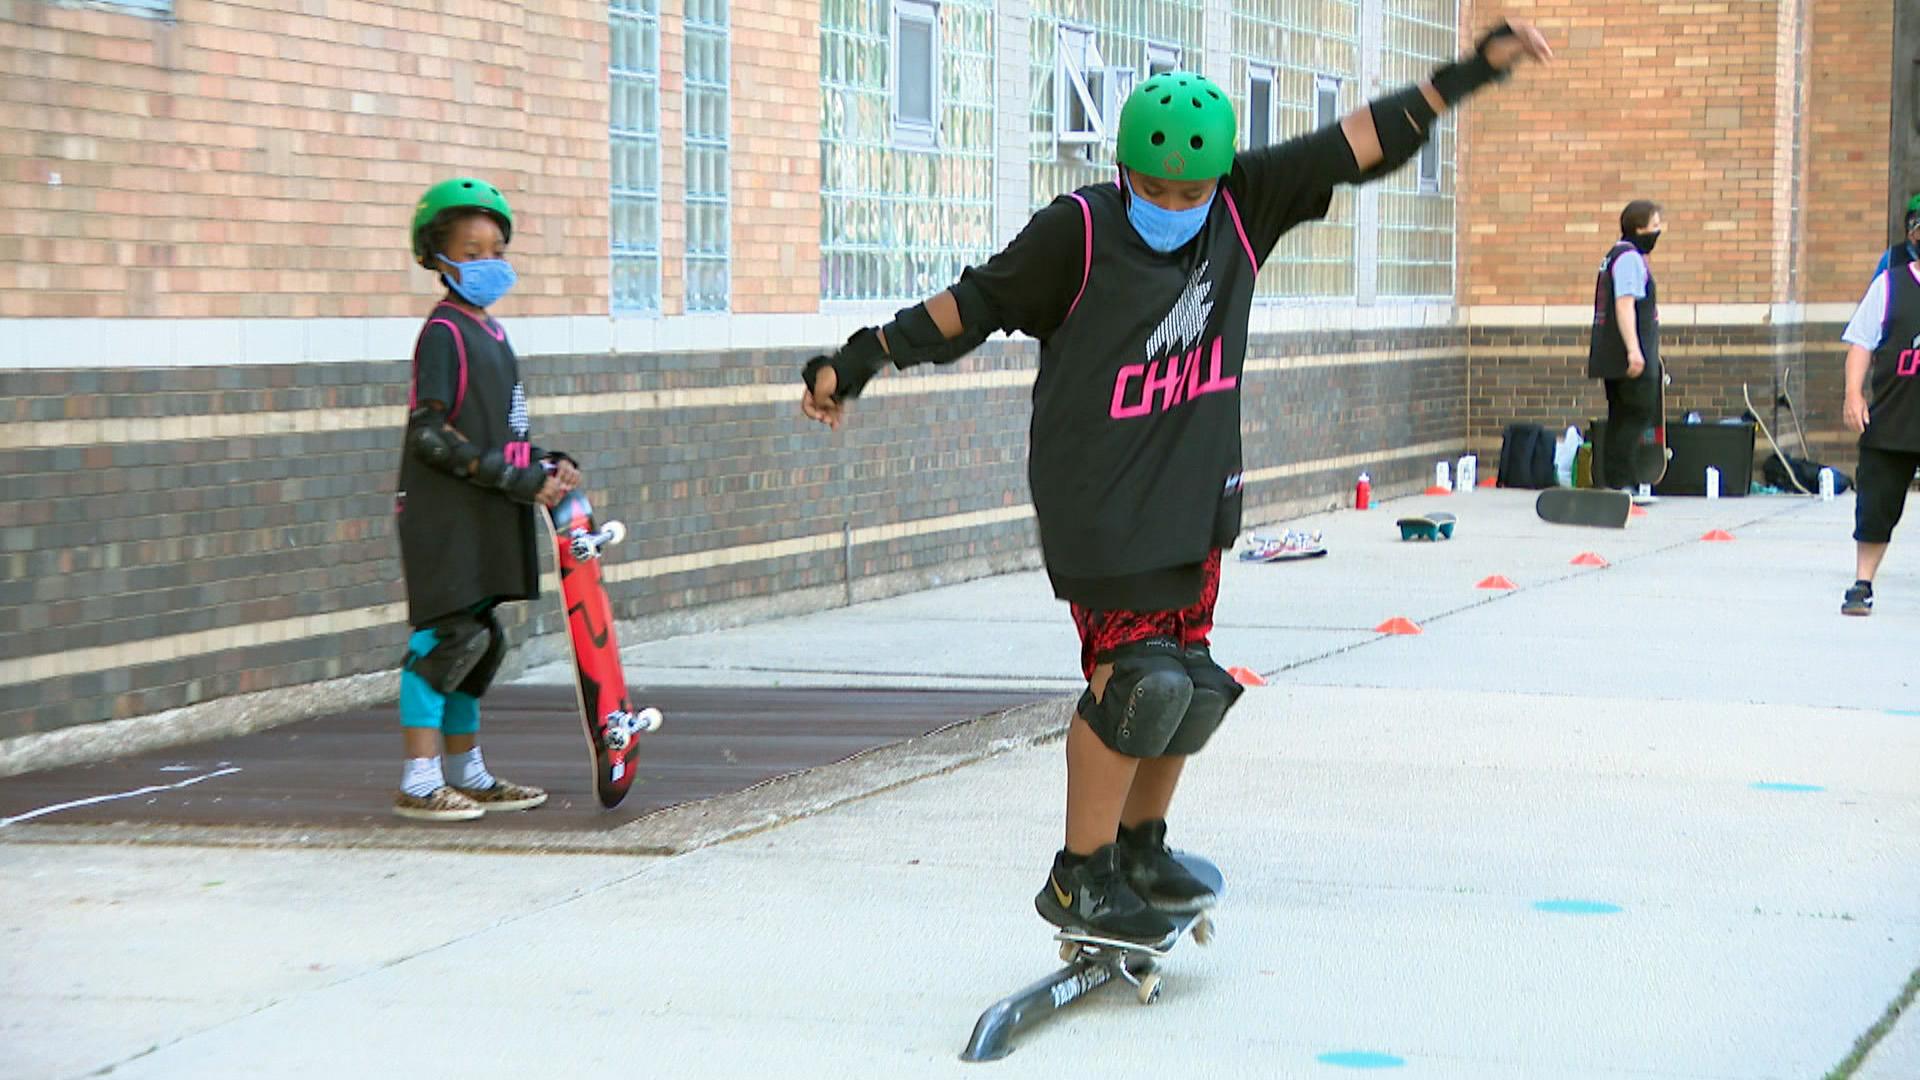 Marcos M., 10, grinds on a rail while skateboarding at the Chill Foundation’s spring skateboard program held at Louis L. Valentine Boys & Girls Club on May 26, 2021. (WTTW News)